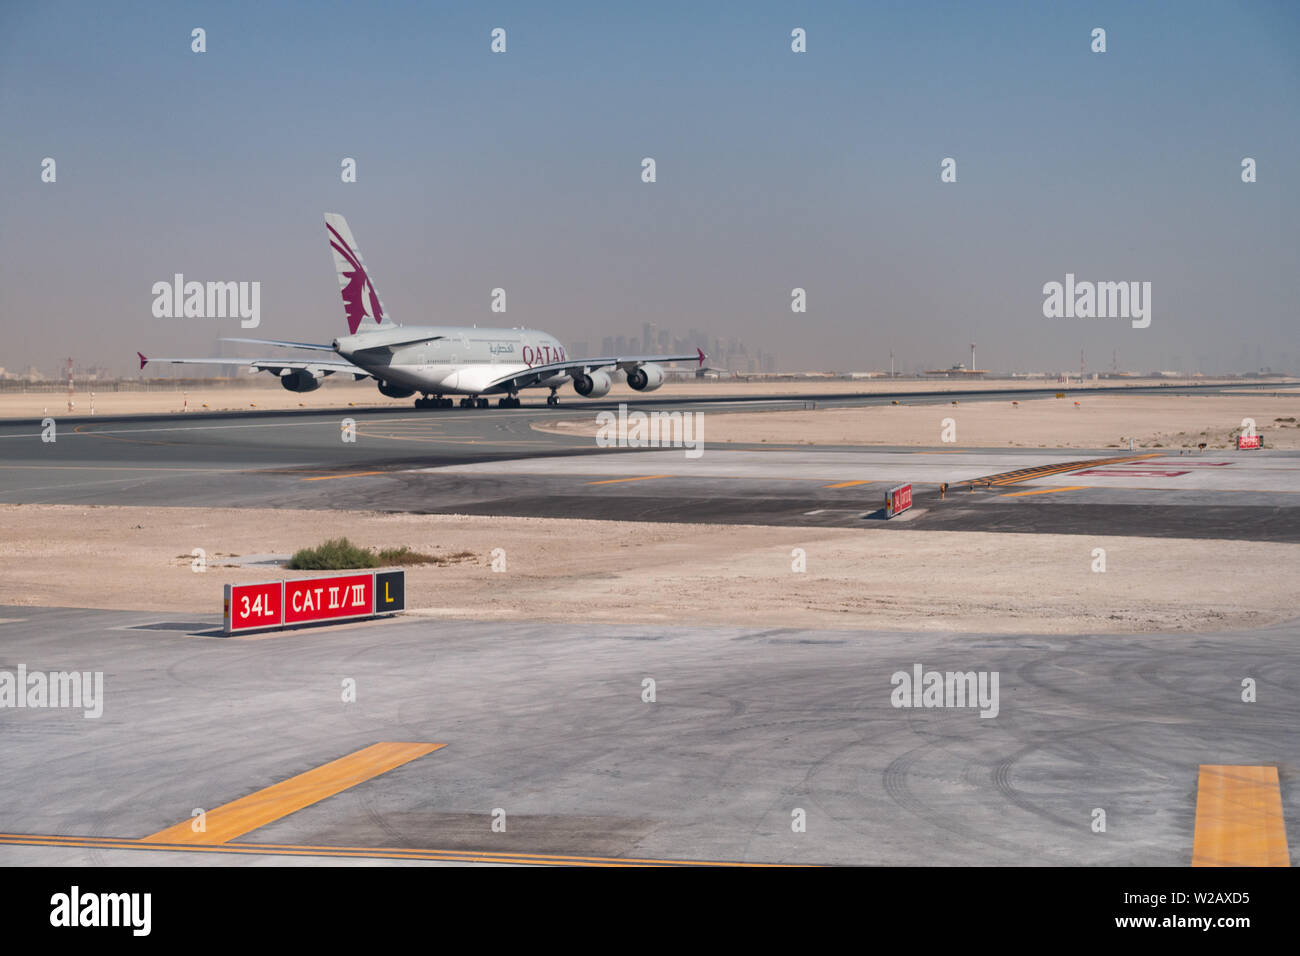 A Qatar Airways Airbus A380-800 superjumbo jet accelerates for takeoff at Hamad International Airport, Doha, State of Qatar Stock Photo